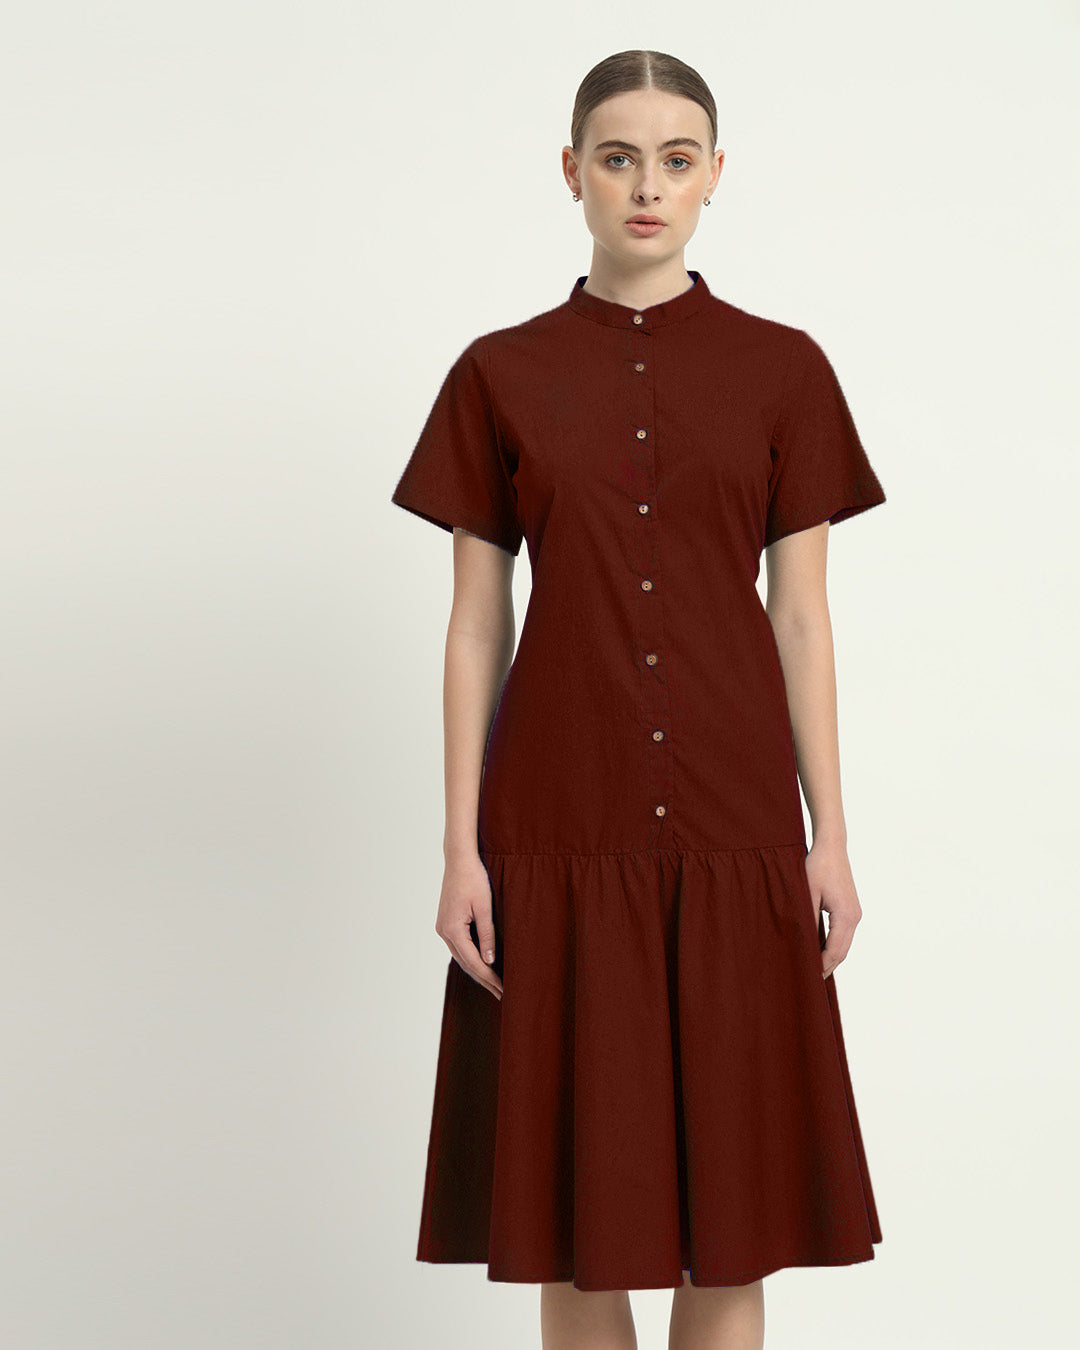 The Melrose Rouge Cotton Dress